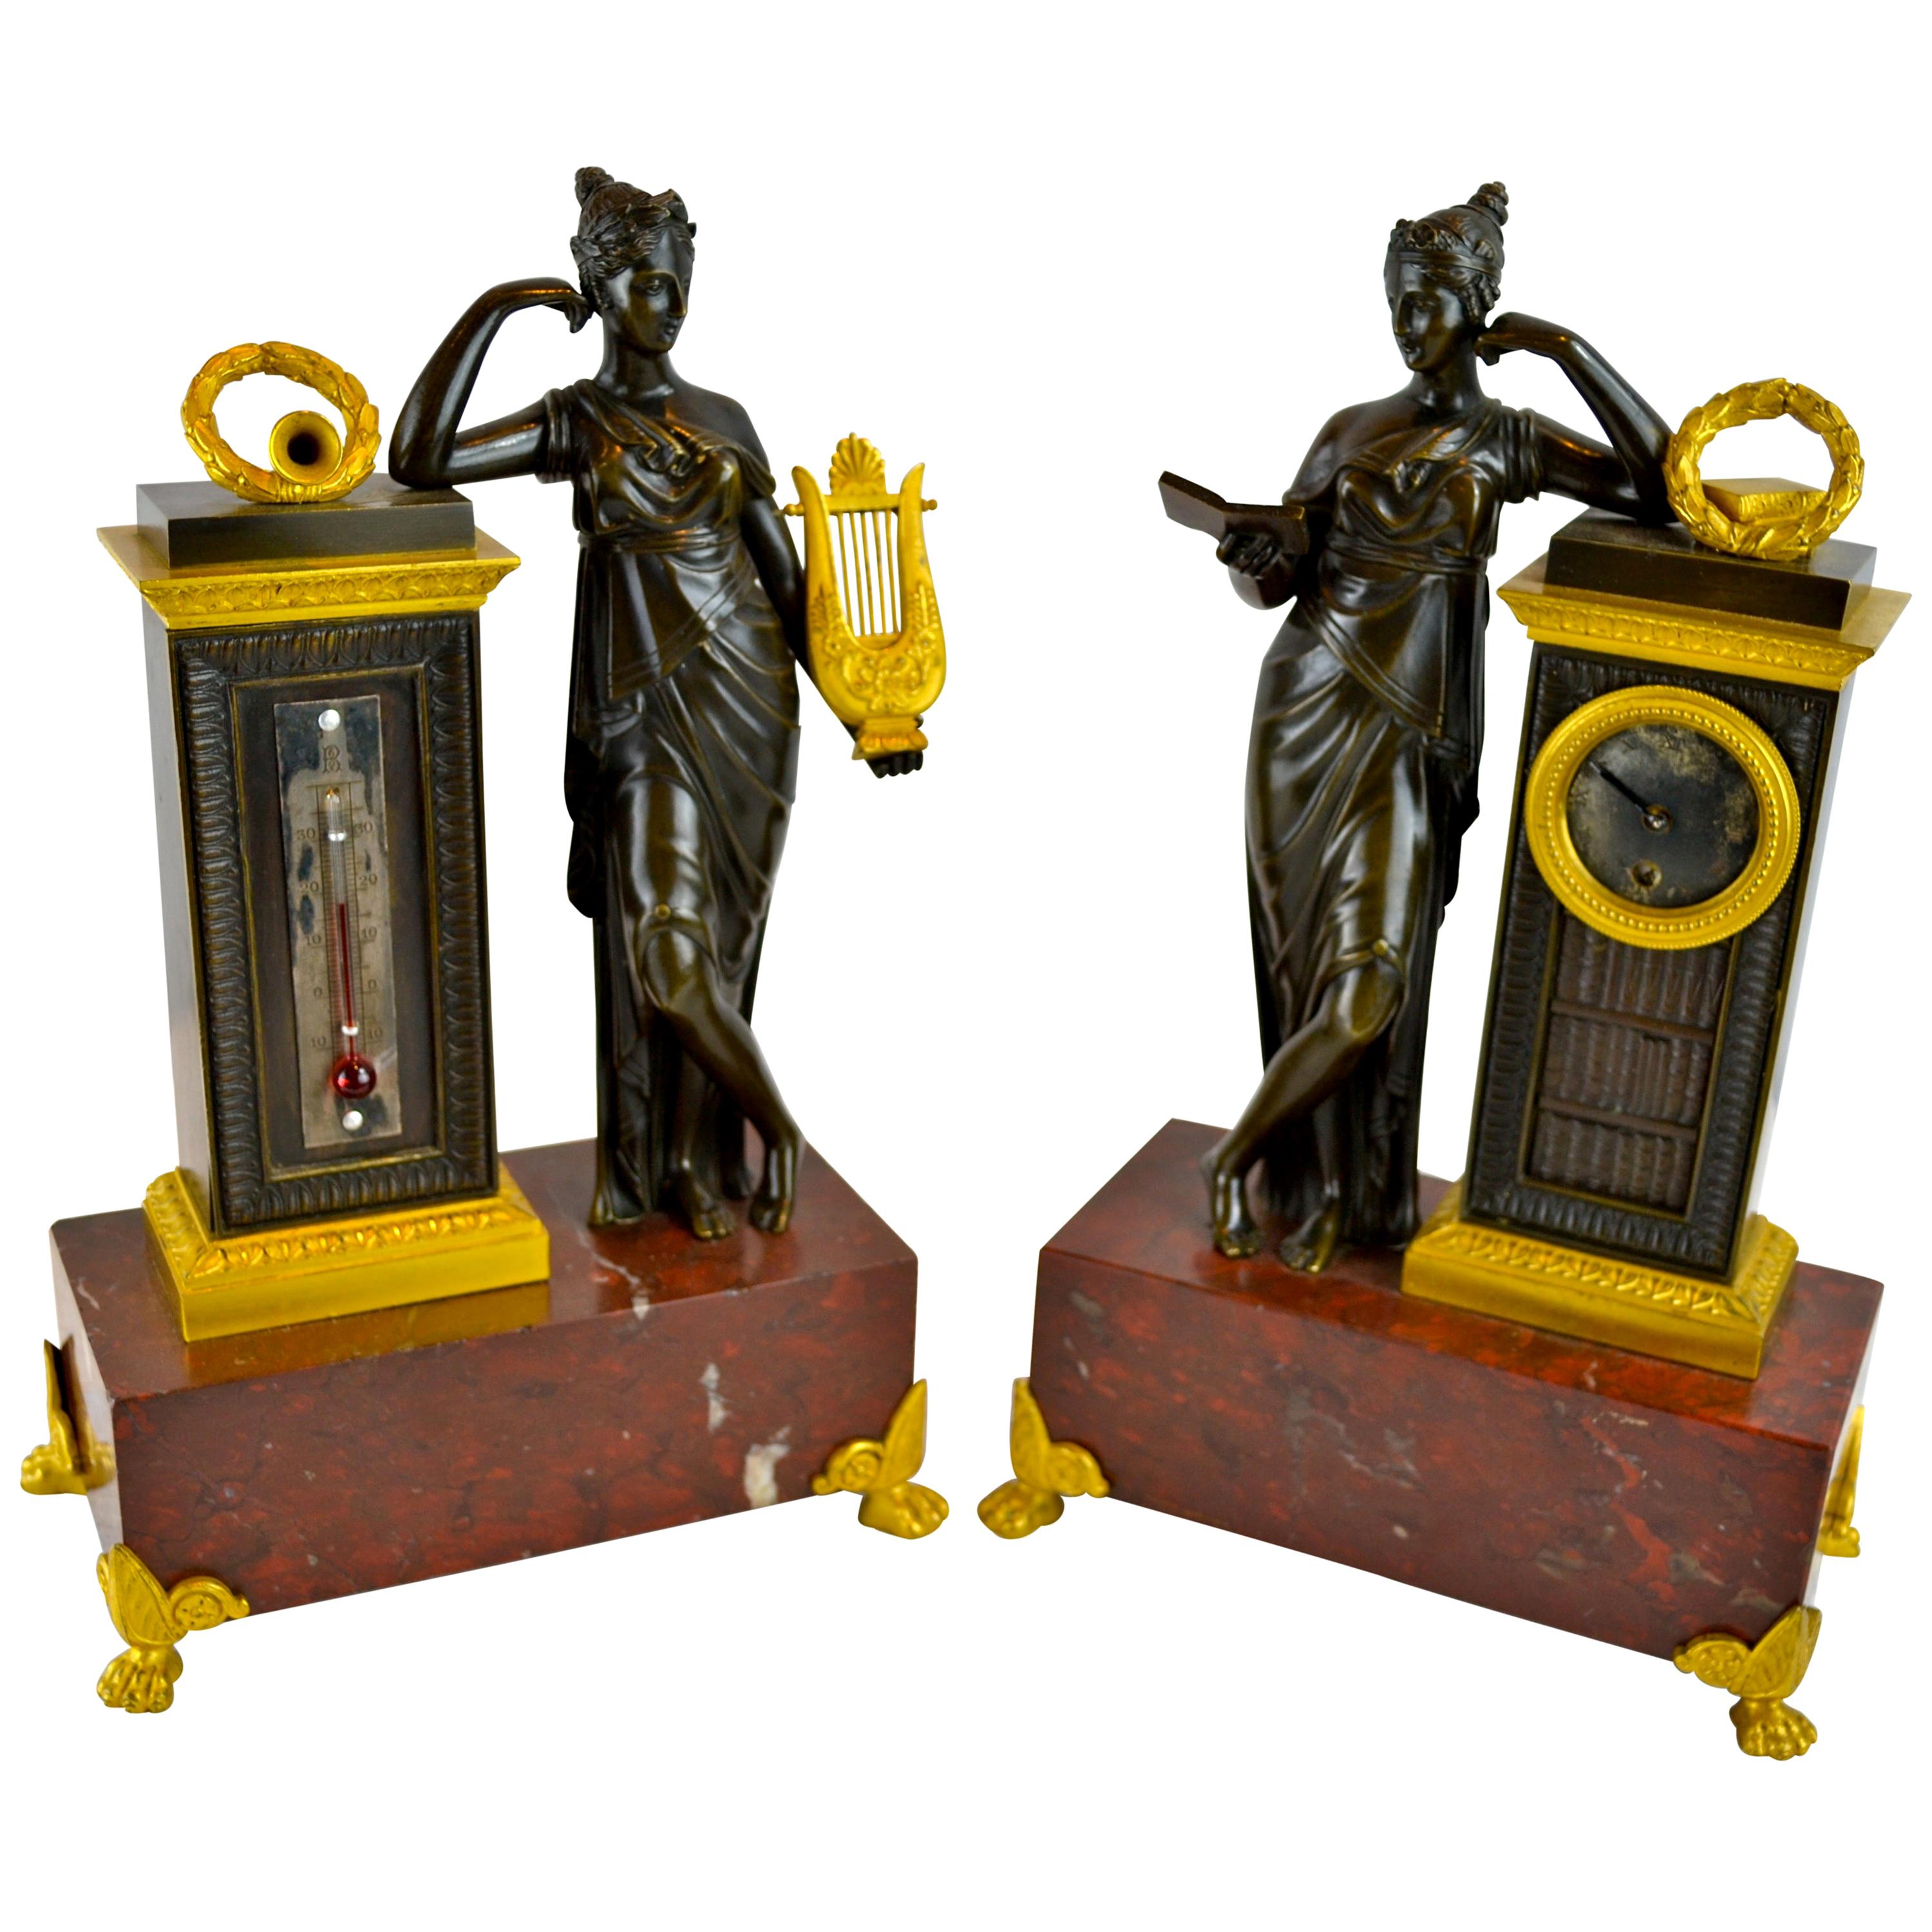  Rare French Empire Marble and Patinated Bronze Clock and Barometer Desk Set